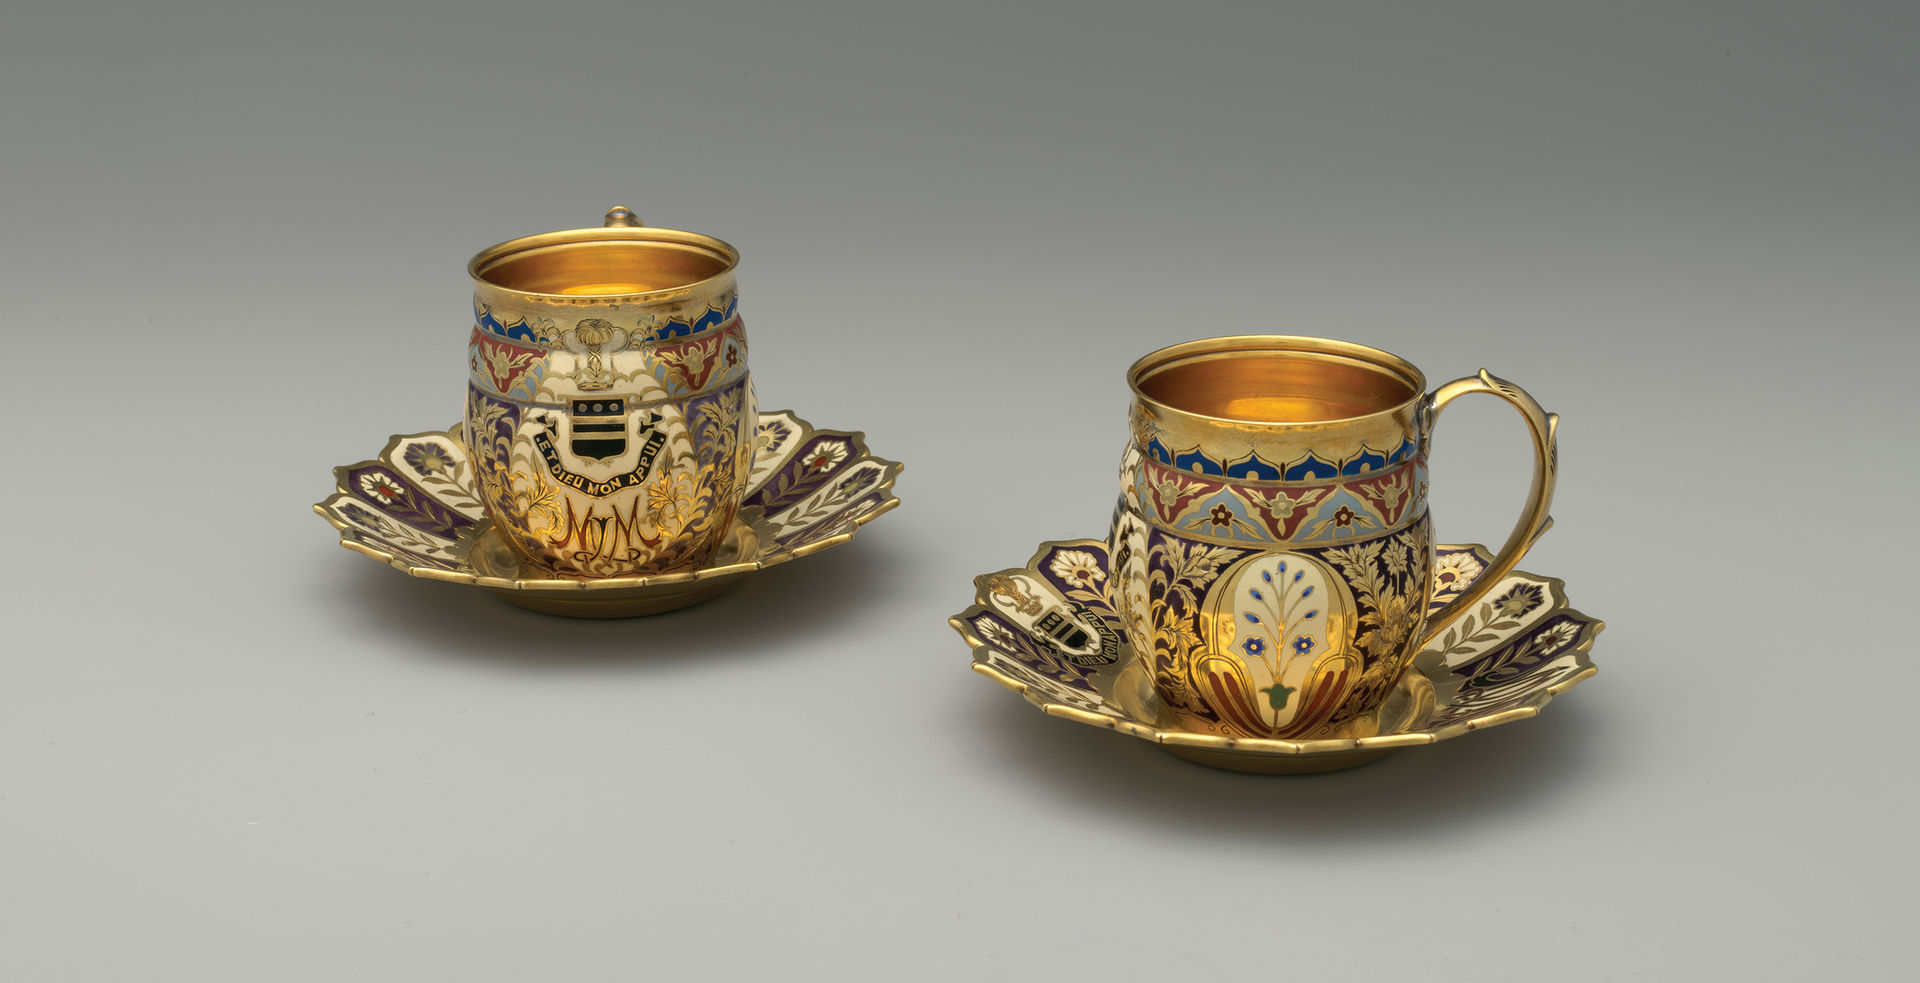 A pair of dazzling gilded and enameled cups and saucers adorned with floral designs, a coat of arms, and monogram.